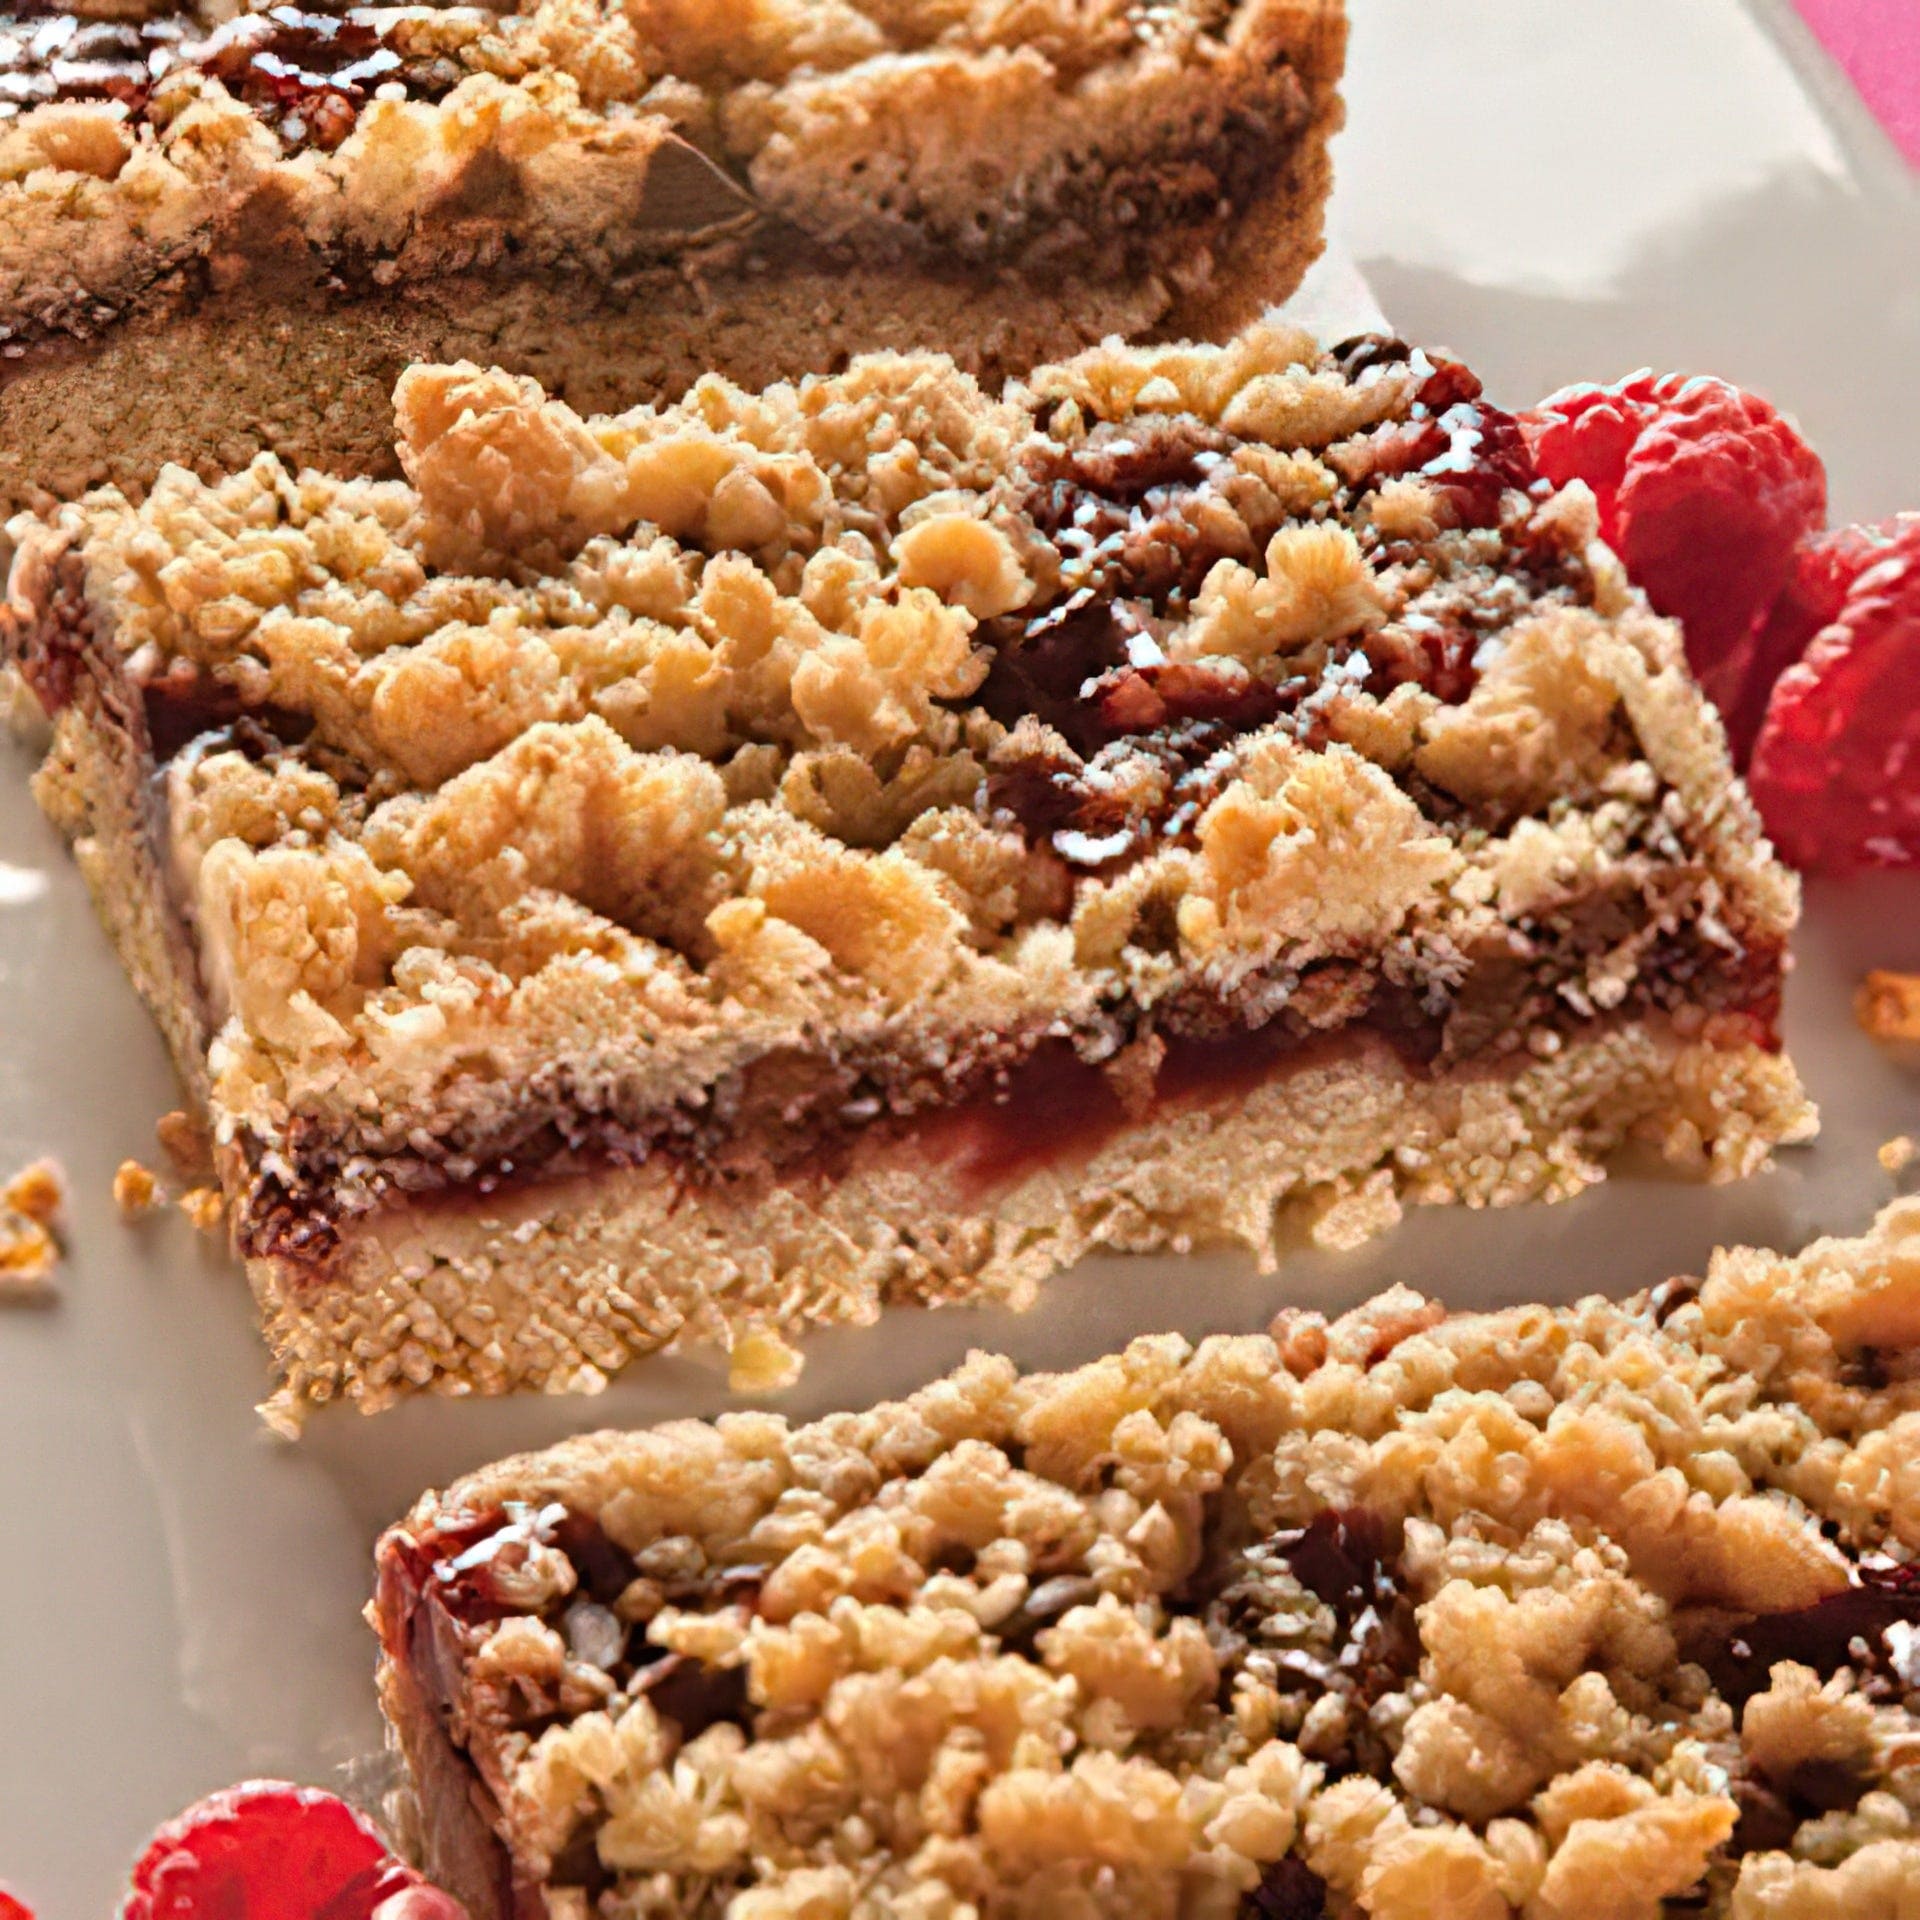 Commercial Red Raspberry Chocolate Bars